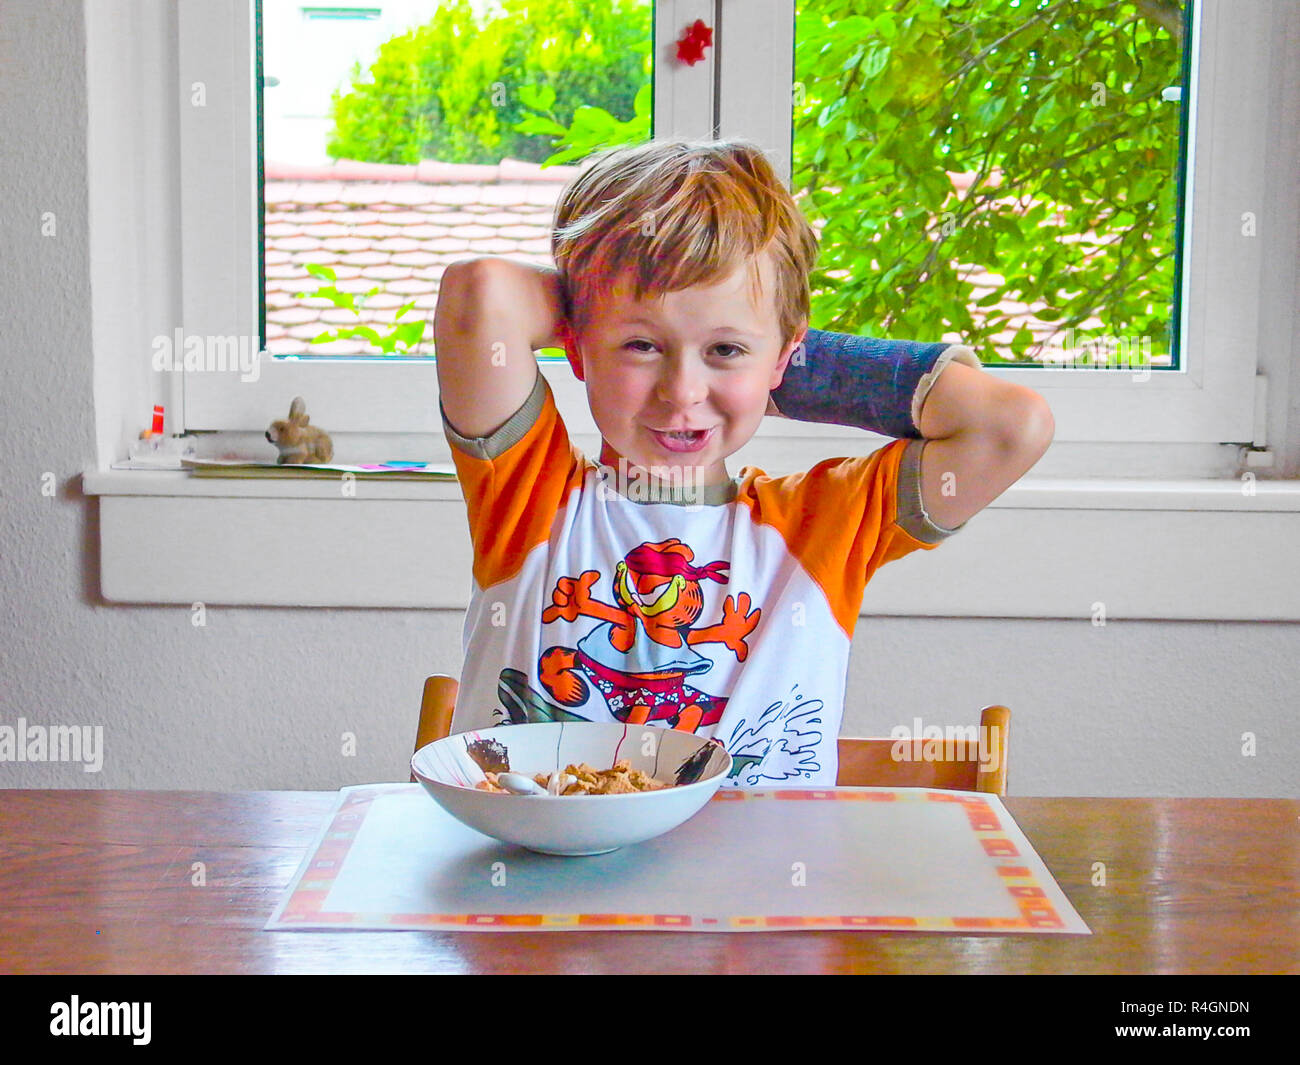 young boy with arm in cast has breakfast at the table Stock Photo